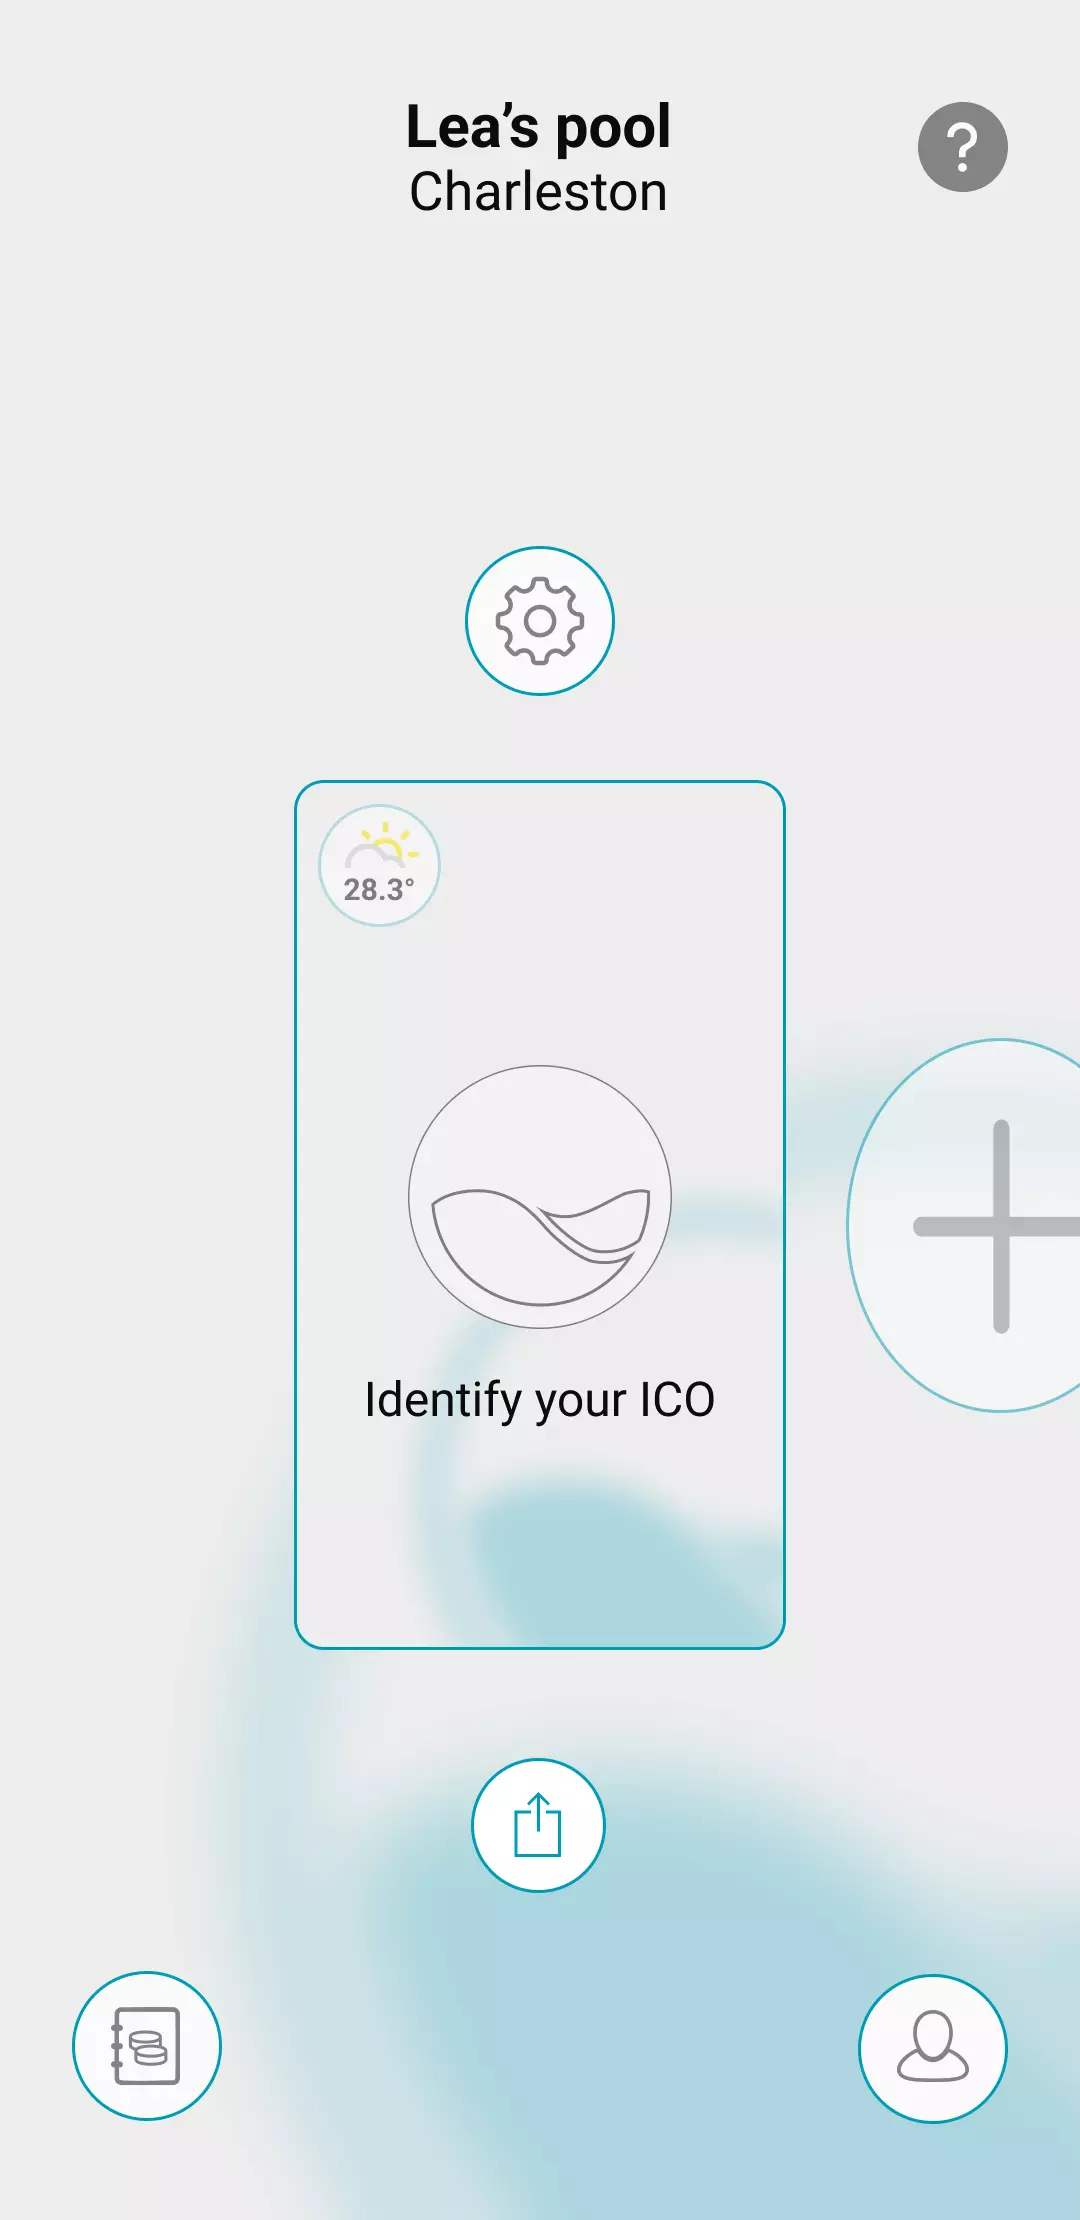 Visual of the ICO application that shows the menu once its account is created, with the appearance of the interface and the box identifying your ICO